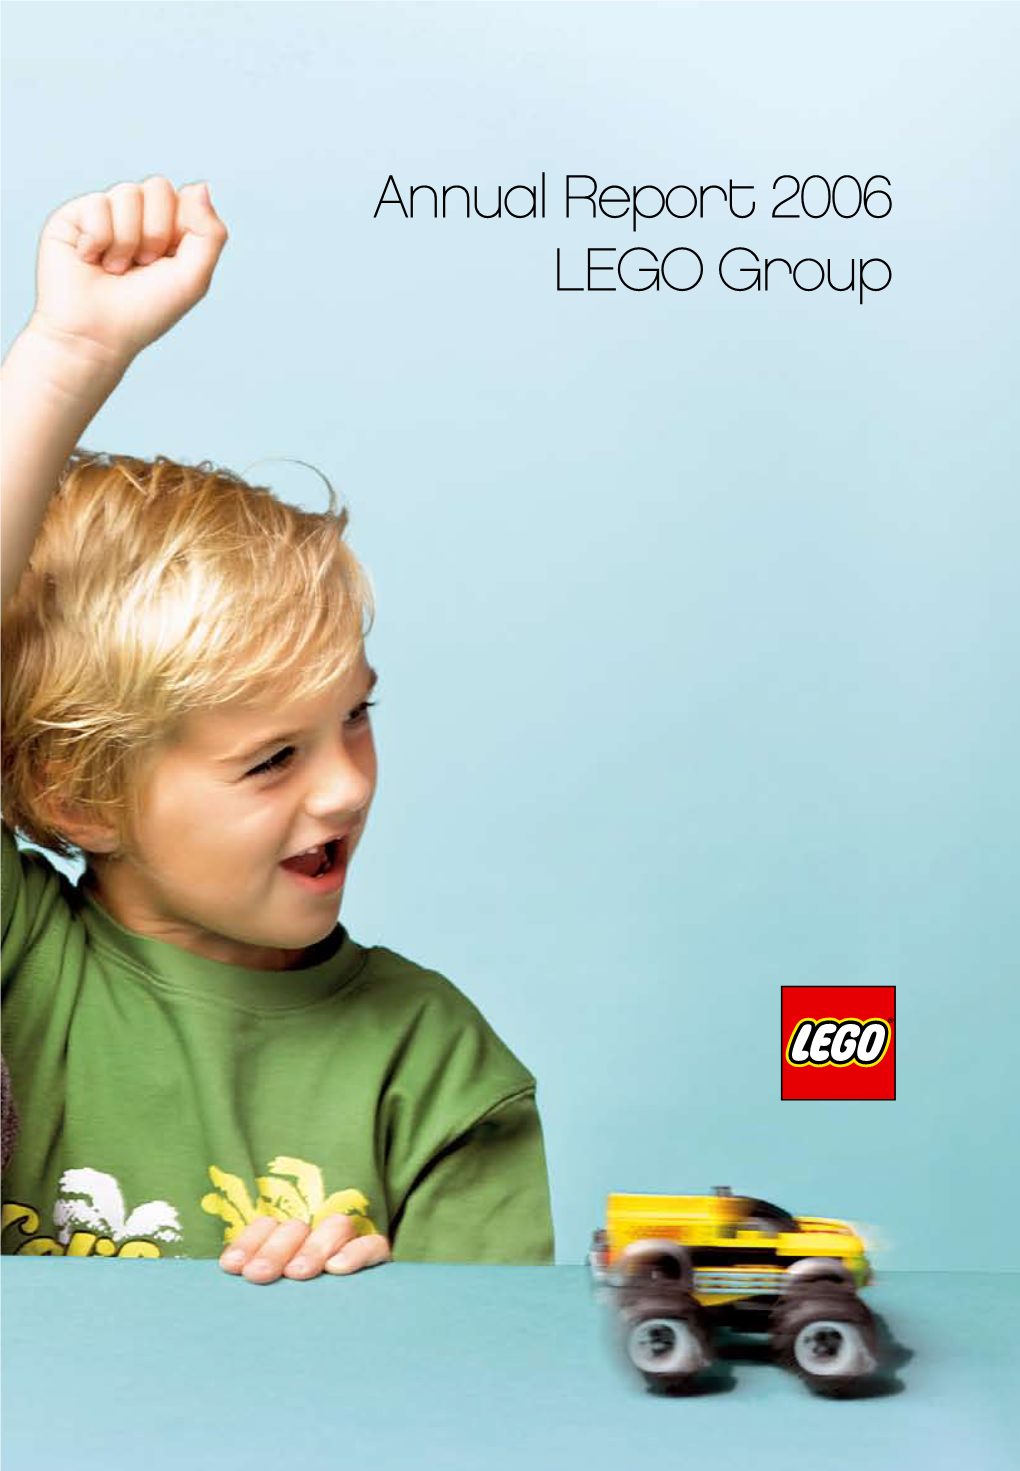 Annual Report 2006 LEGO Group